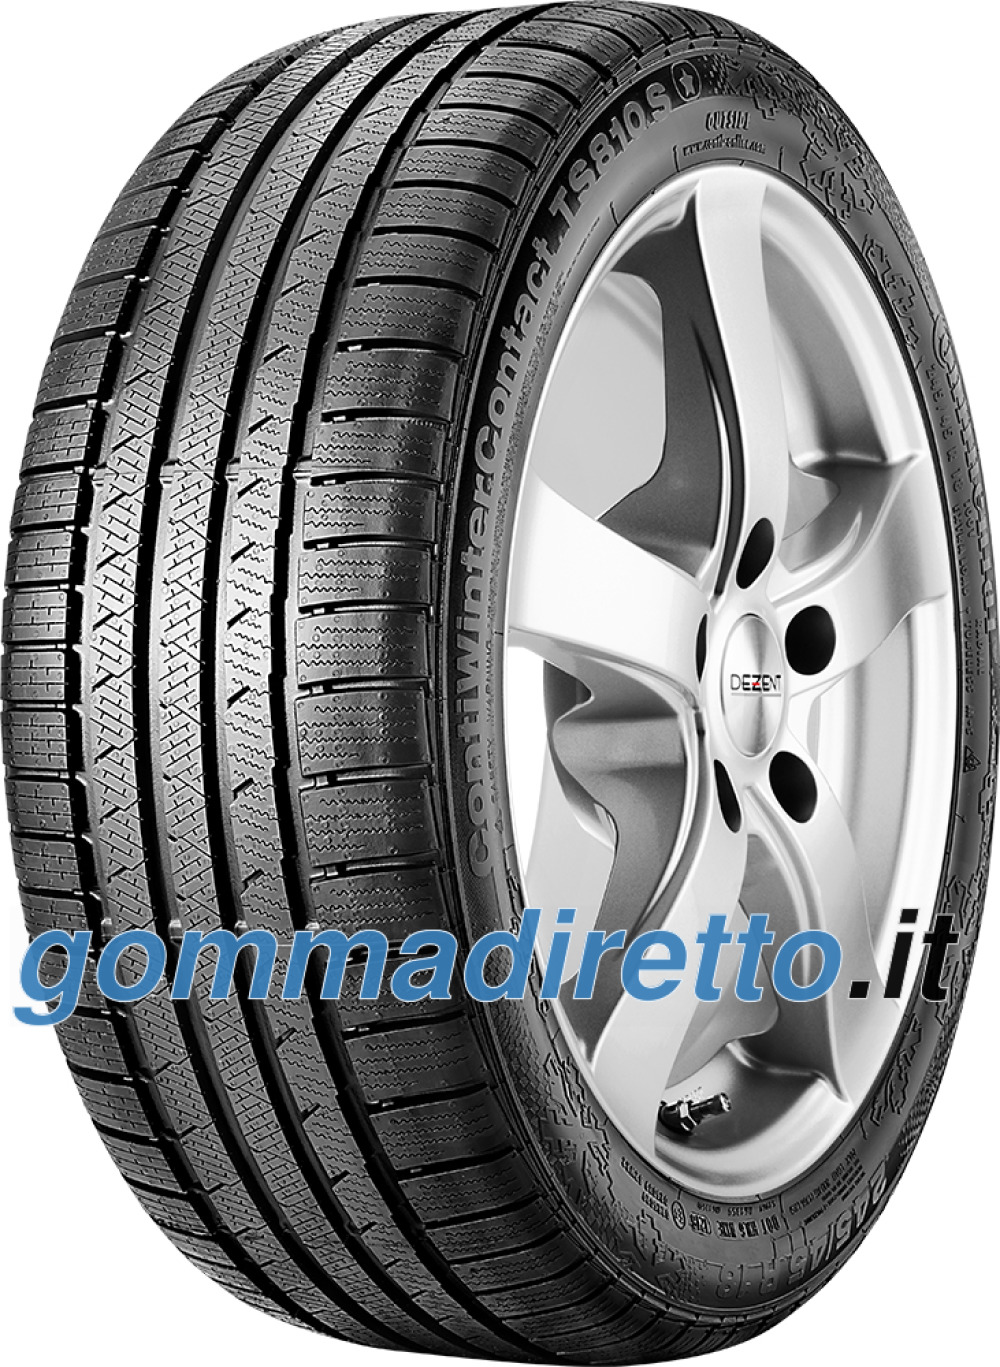 Image of Continental ContiWinterContact TS 810 S ( 235/40 R18 95V XL, N1 )